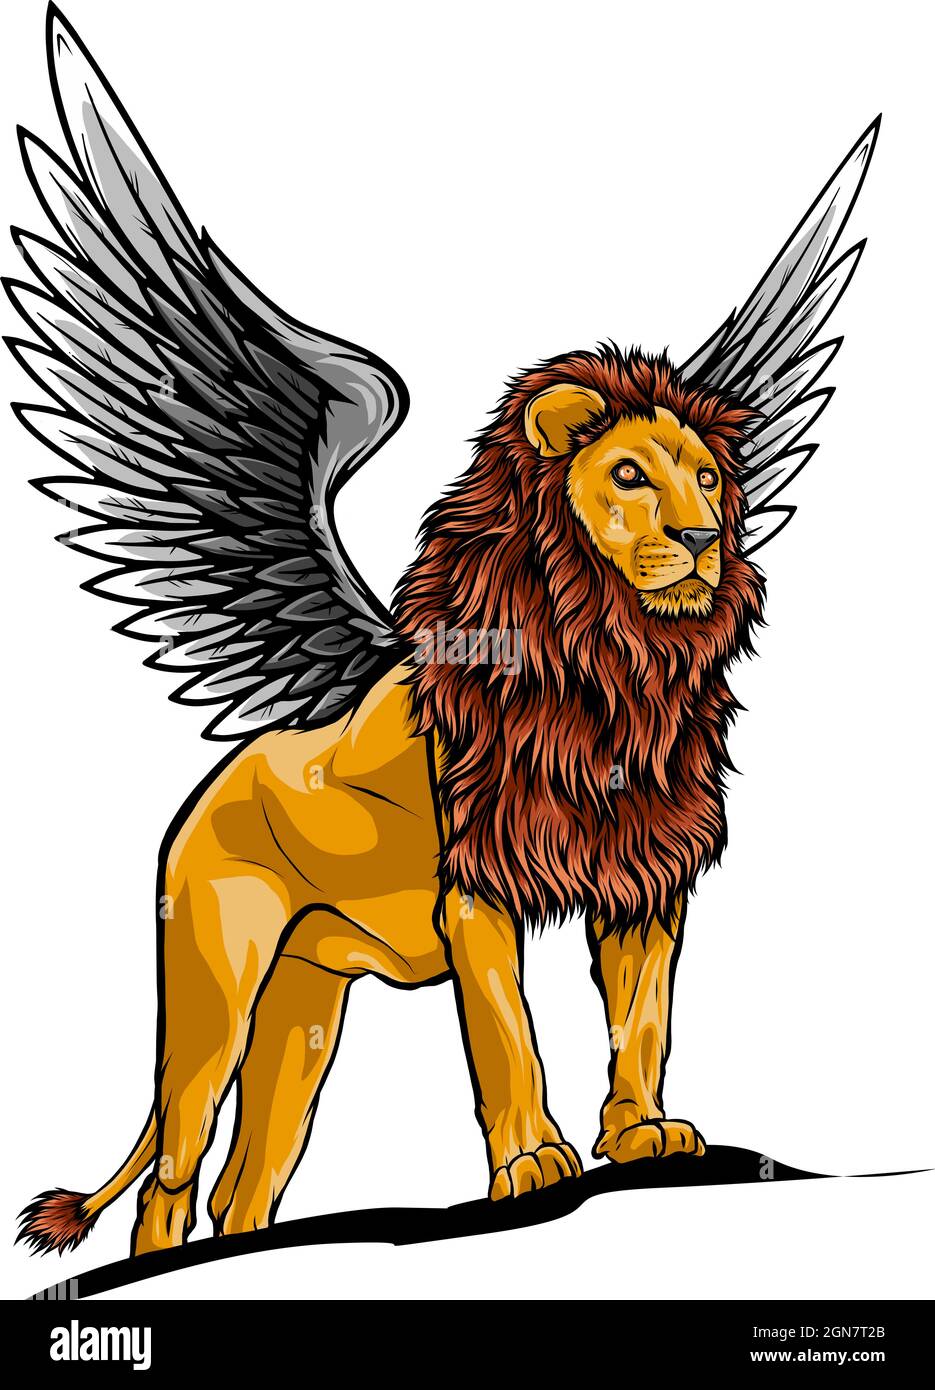 illustration of Winged Lion in vector design Stock Vector